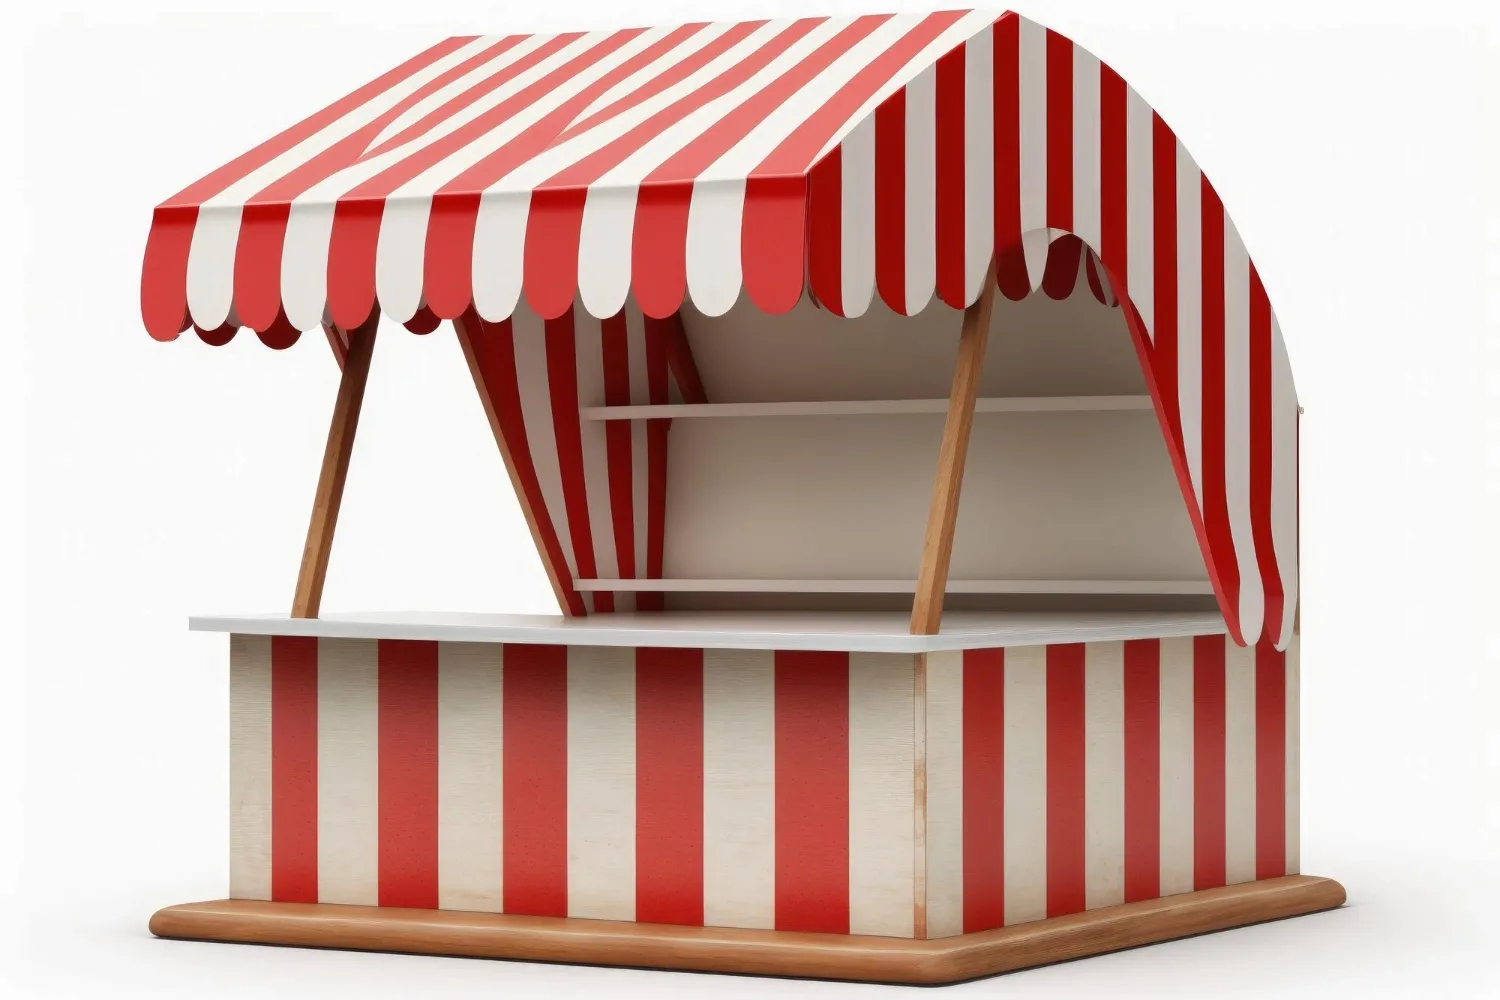 A red and white striped kiosk with the word shop